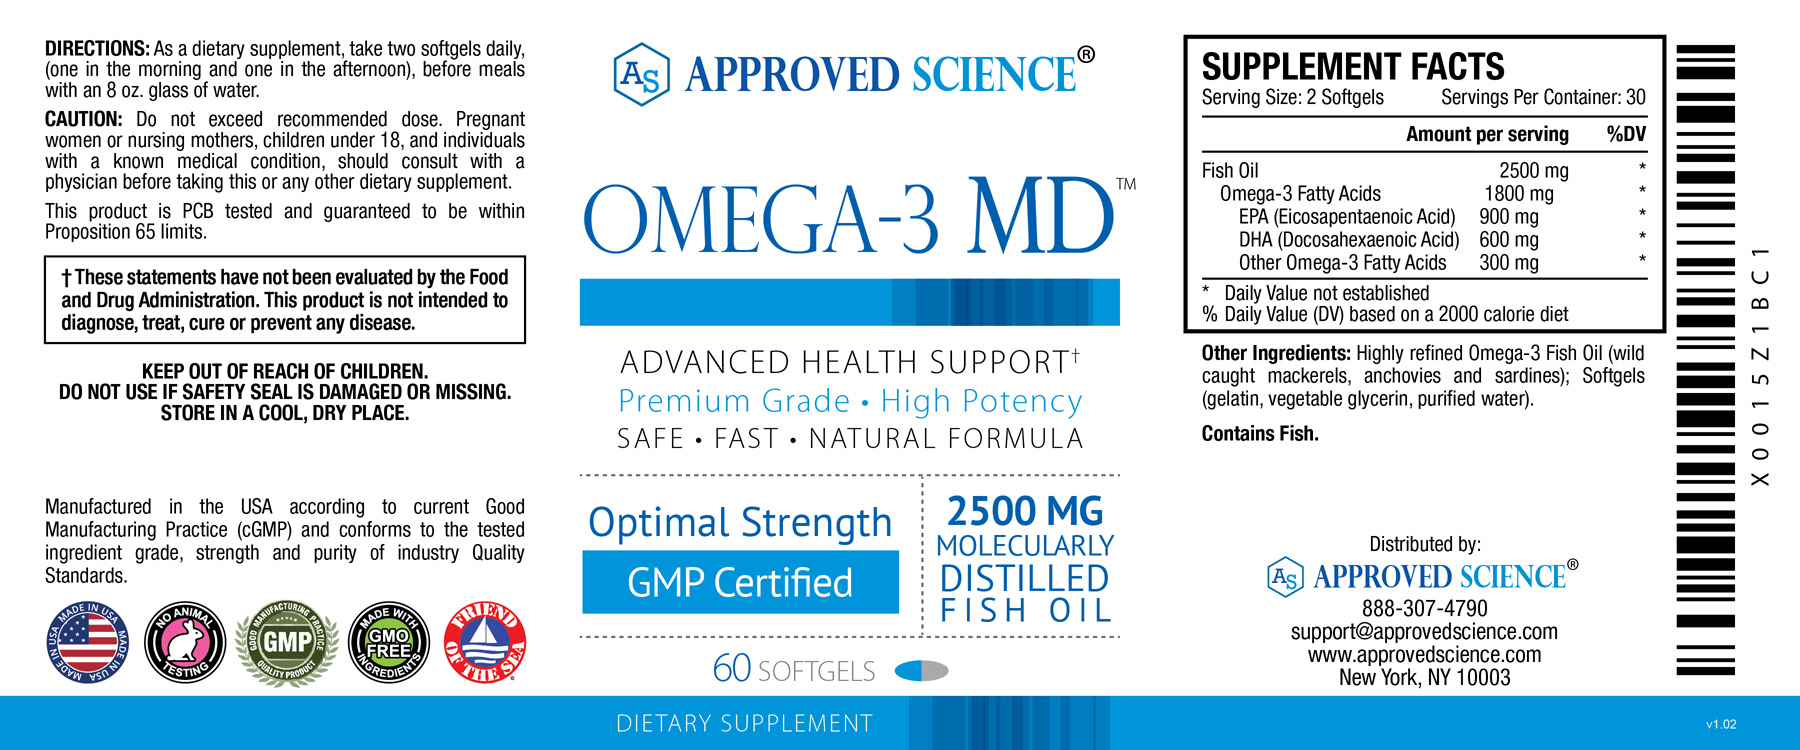 Omega-3 MD™ Supplement Facts